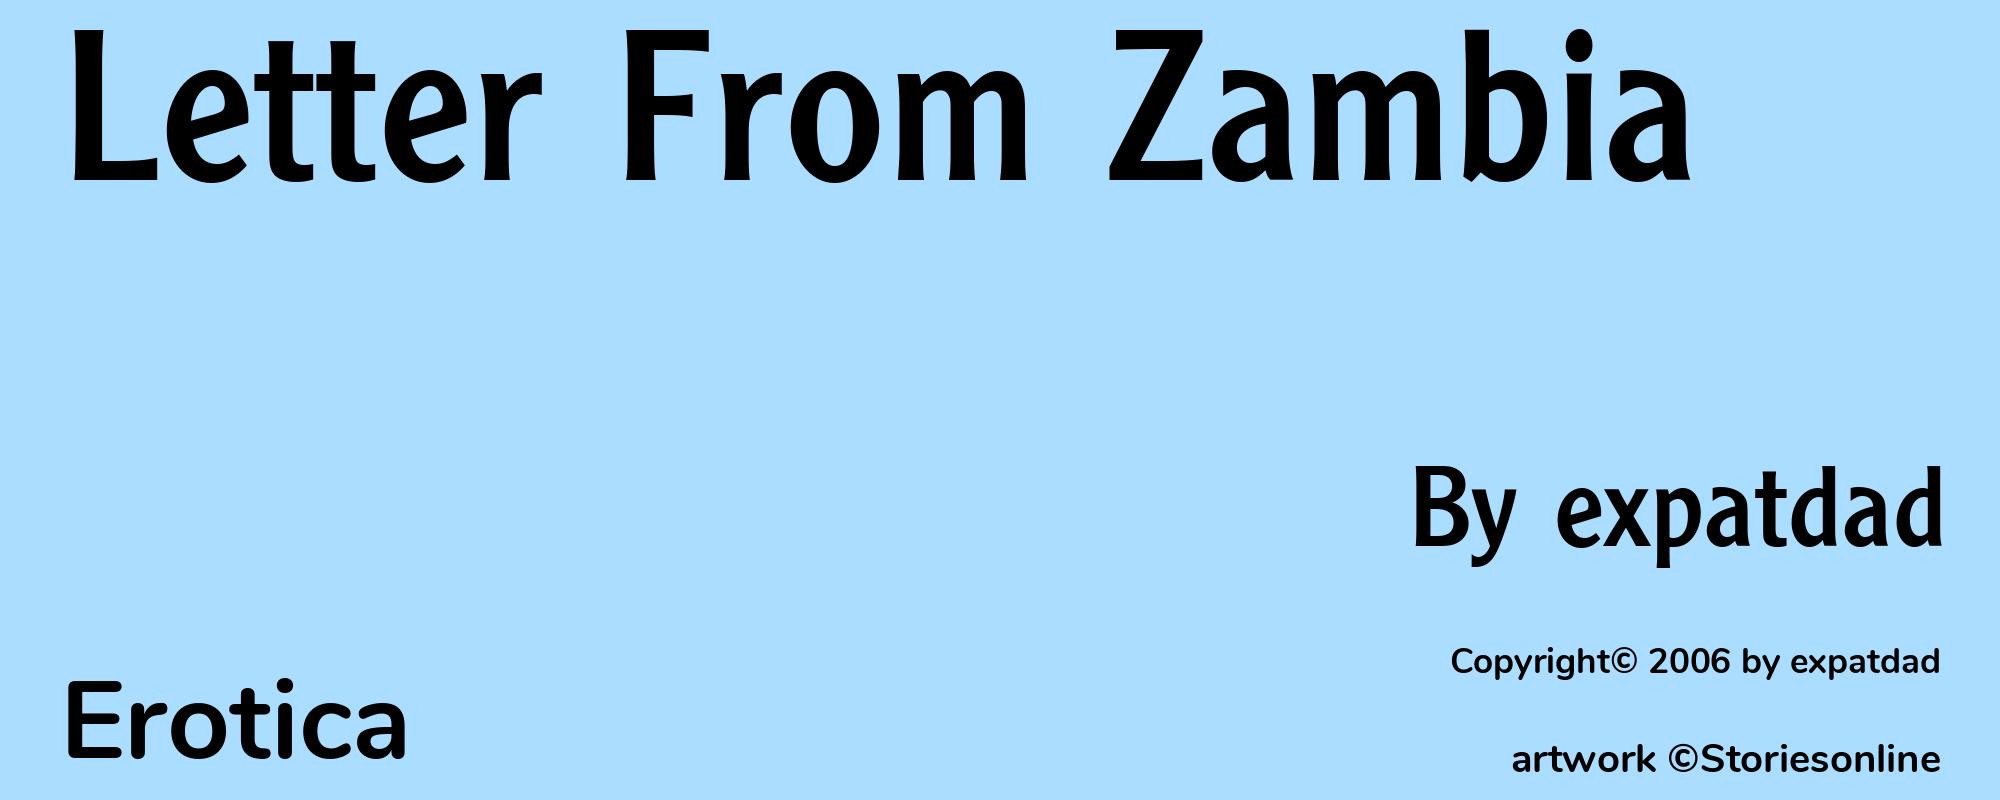 Letter From Zambia - Cover